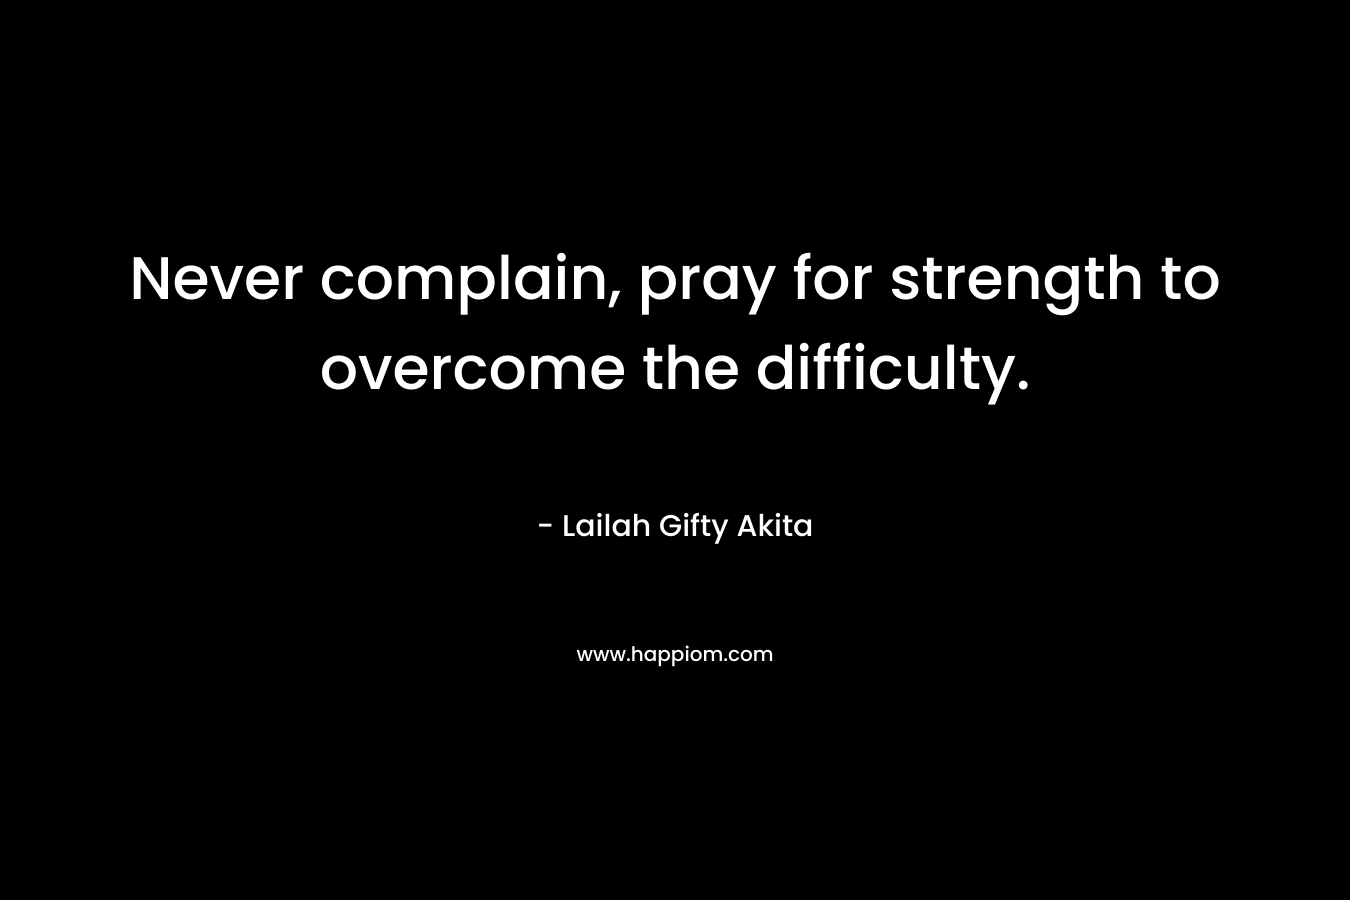 Never complain, pray for strength to overcome the difficulty.